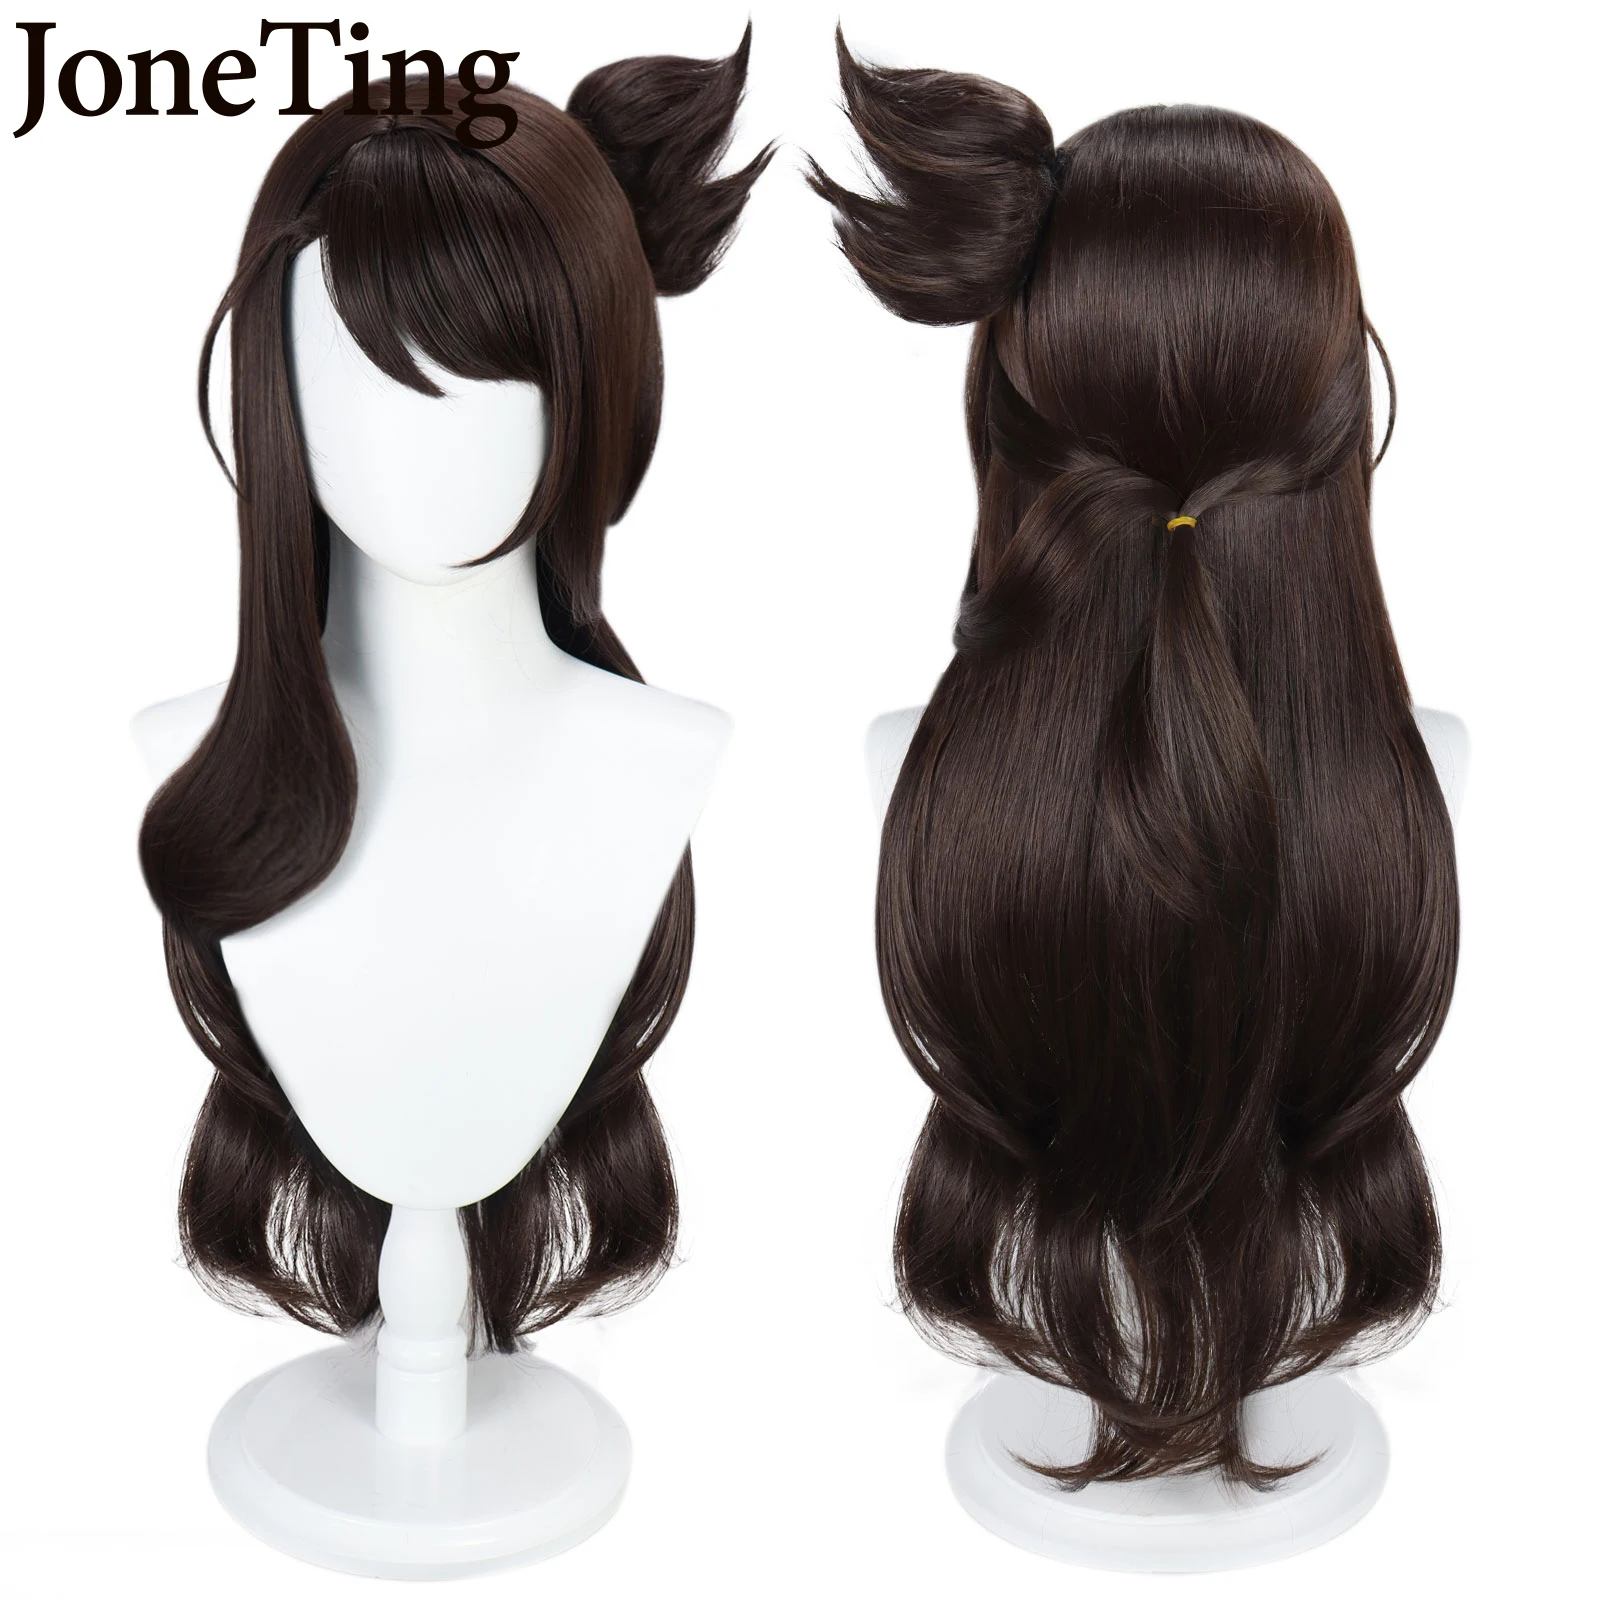 JT Synthetic Beidou Cosplay Wigs Game Genshin Impact Wig Removable Bun Brown Long Straight Wig with Bangs Halloween Party l email wig genshin impact jean cosplay wigs with ponytail blonde curly wig with bangs heat resistant synthetic hair game cos